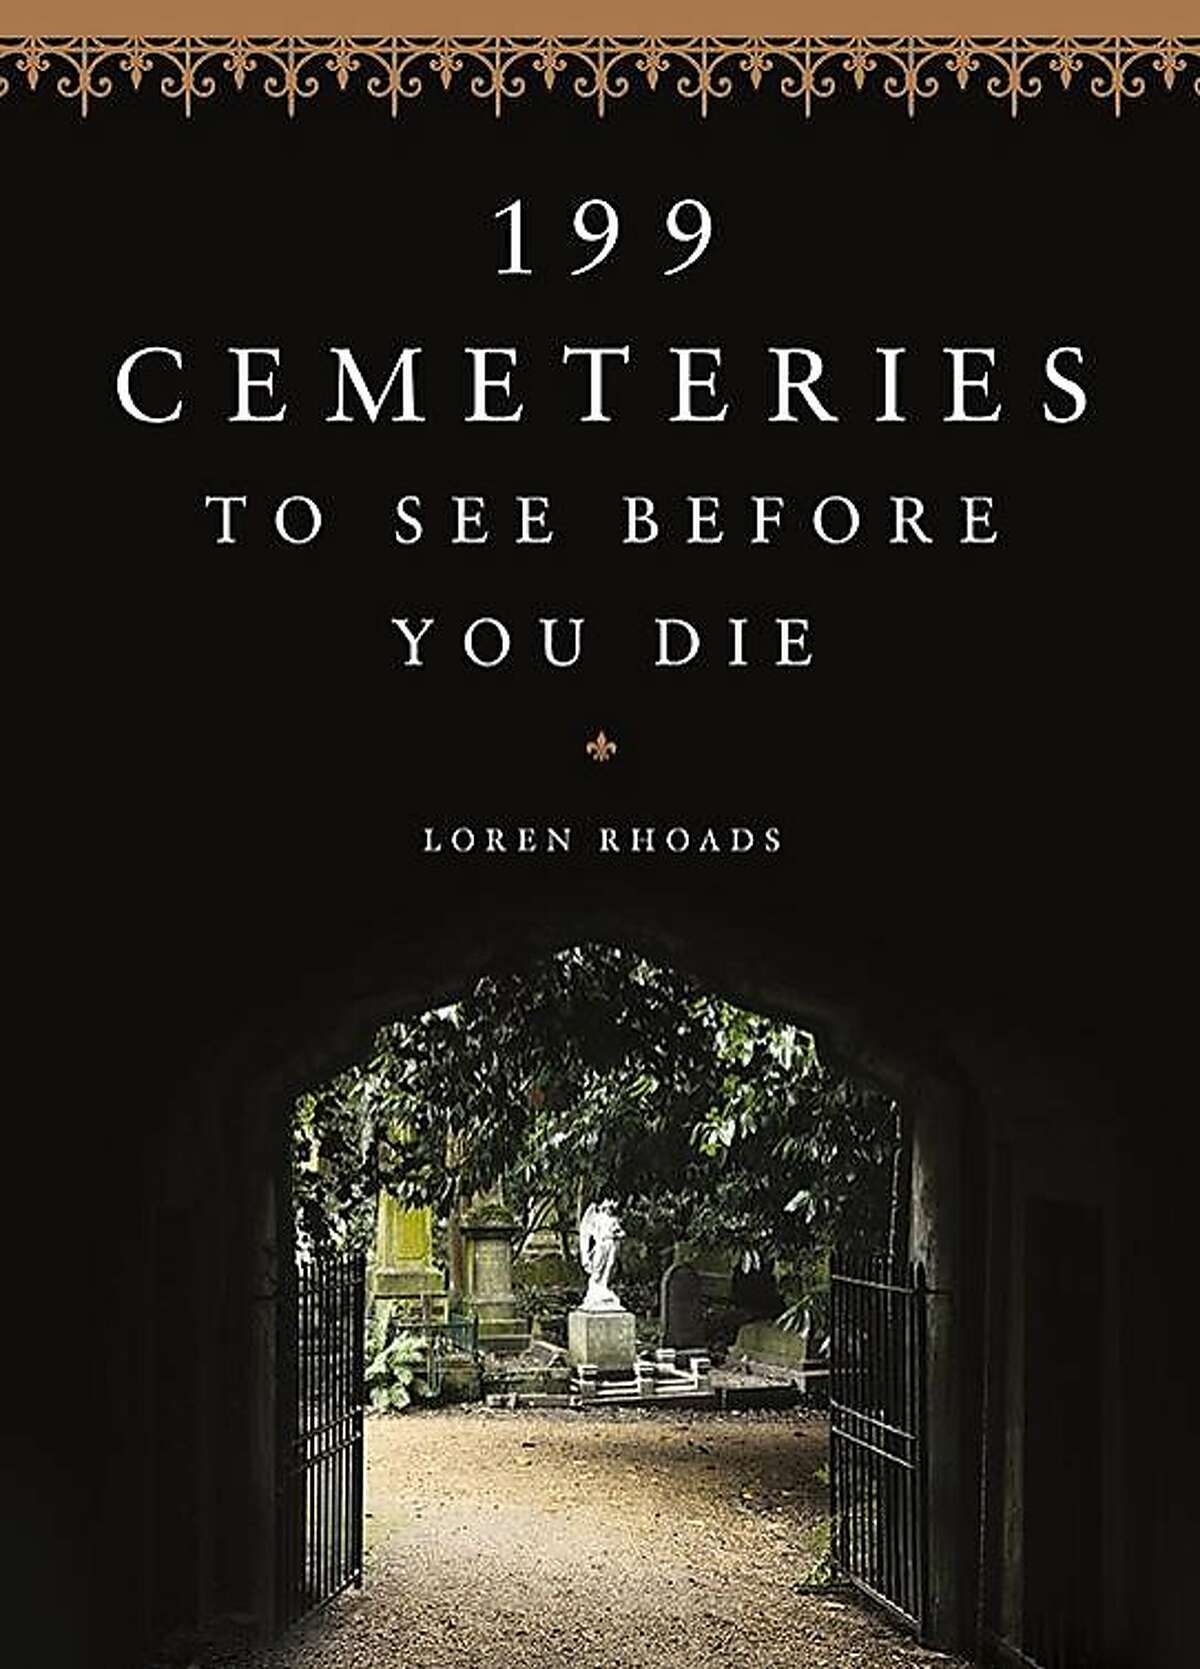 Cover of "199 Cemeteries to See Before You Die" by Loren Rhoads.